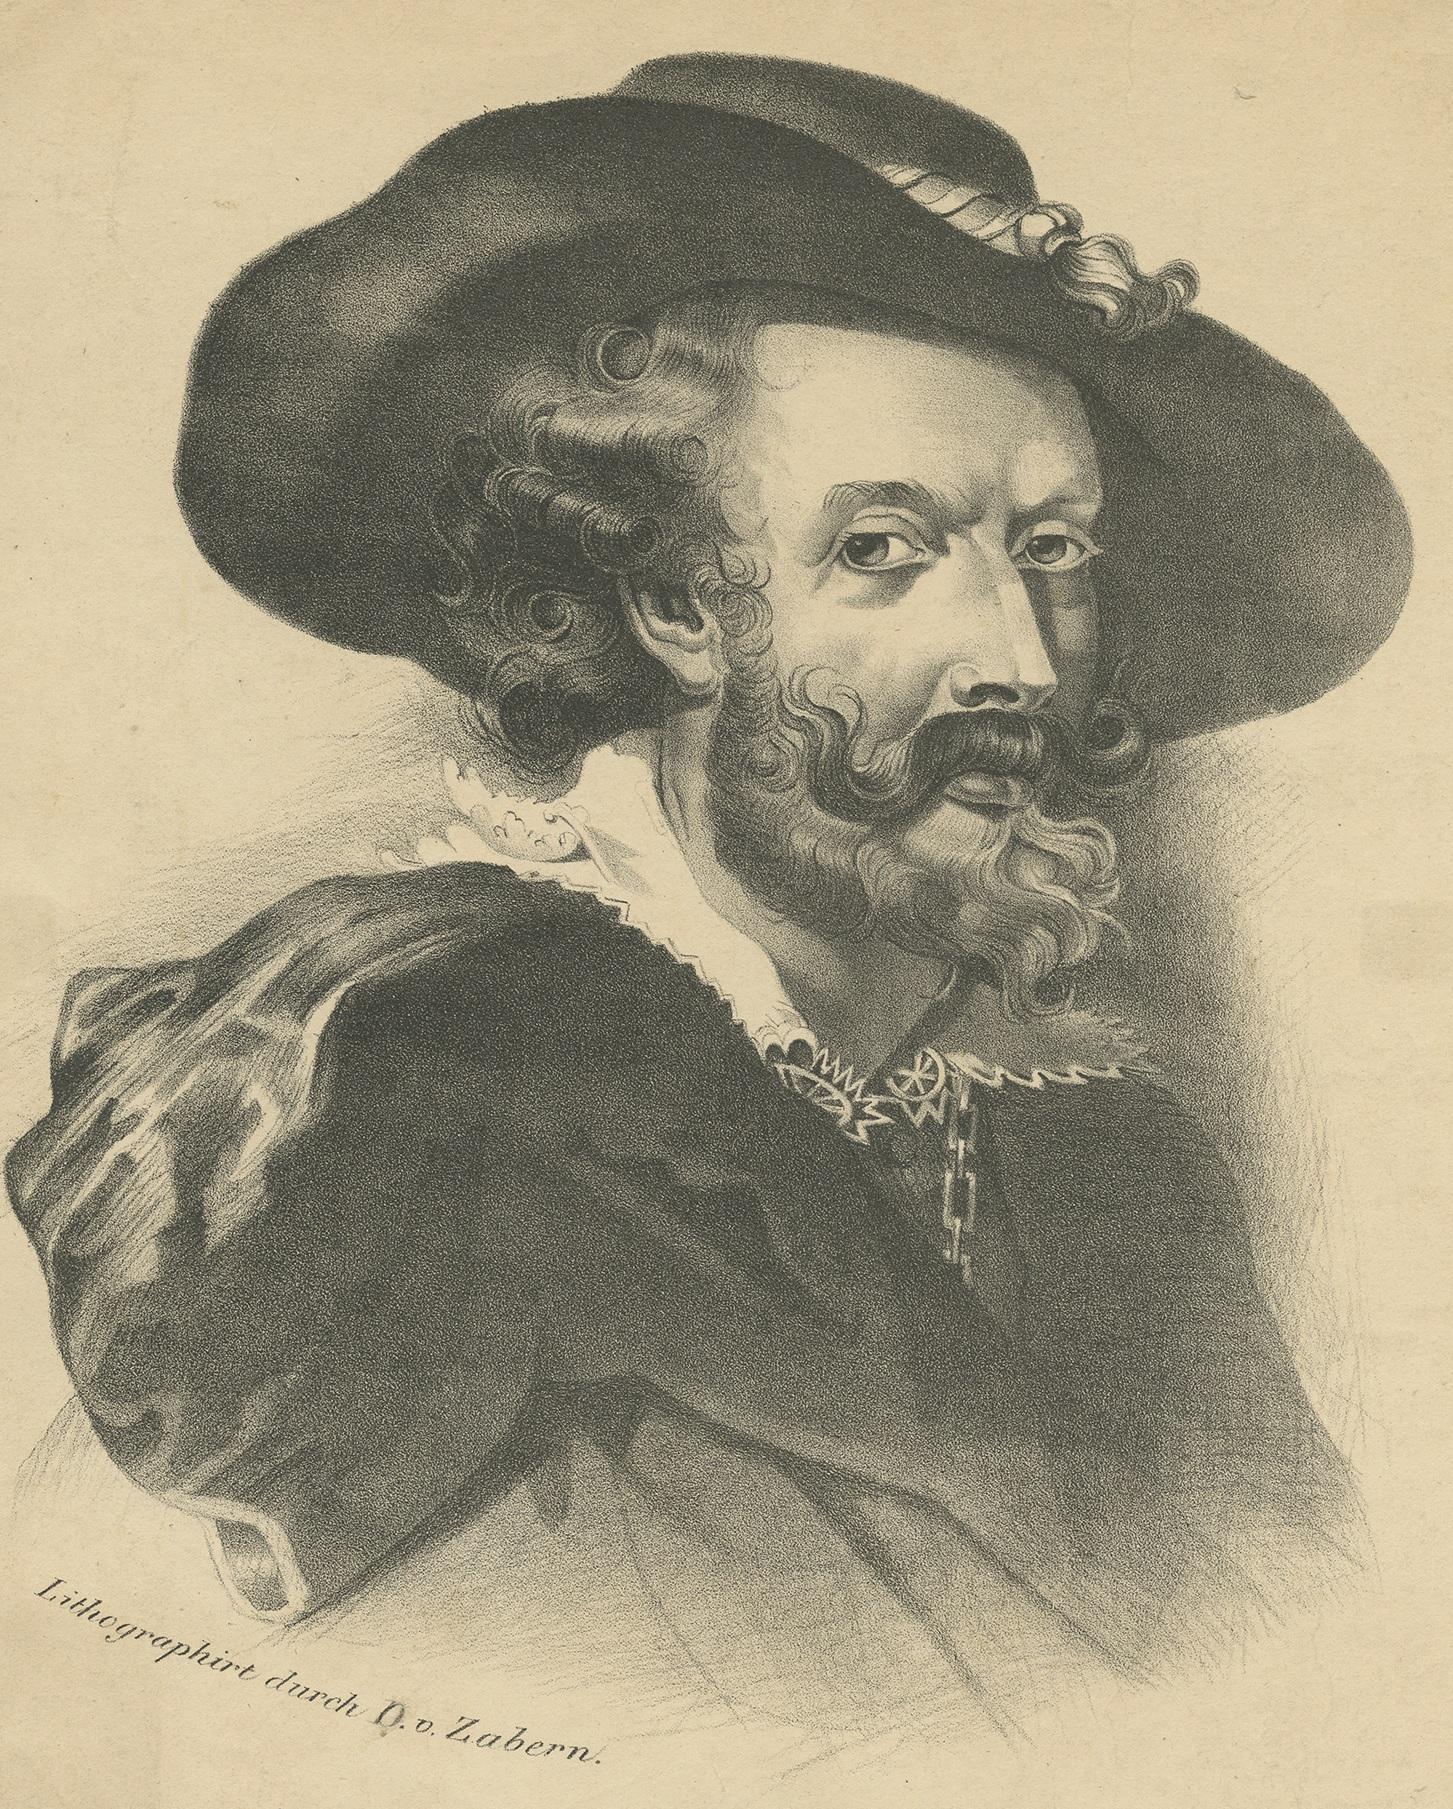 Antique print titled 'P.P. Rubens'. Sir Peter Paul Rubens was a Flemish artist. He is considered the most influential artist of Flemish Baroque tradition. Lithographed by David von Zabern.